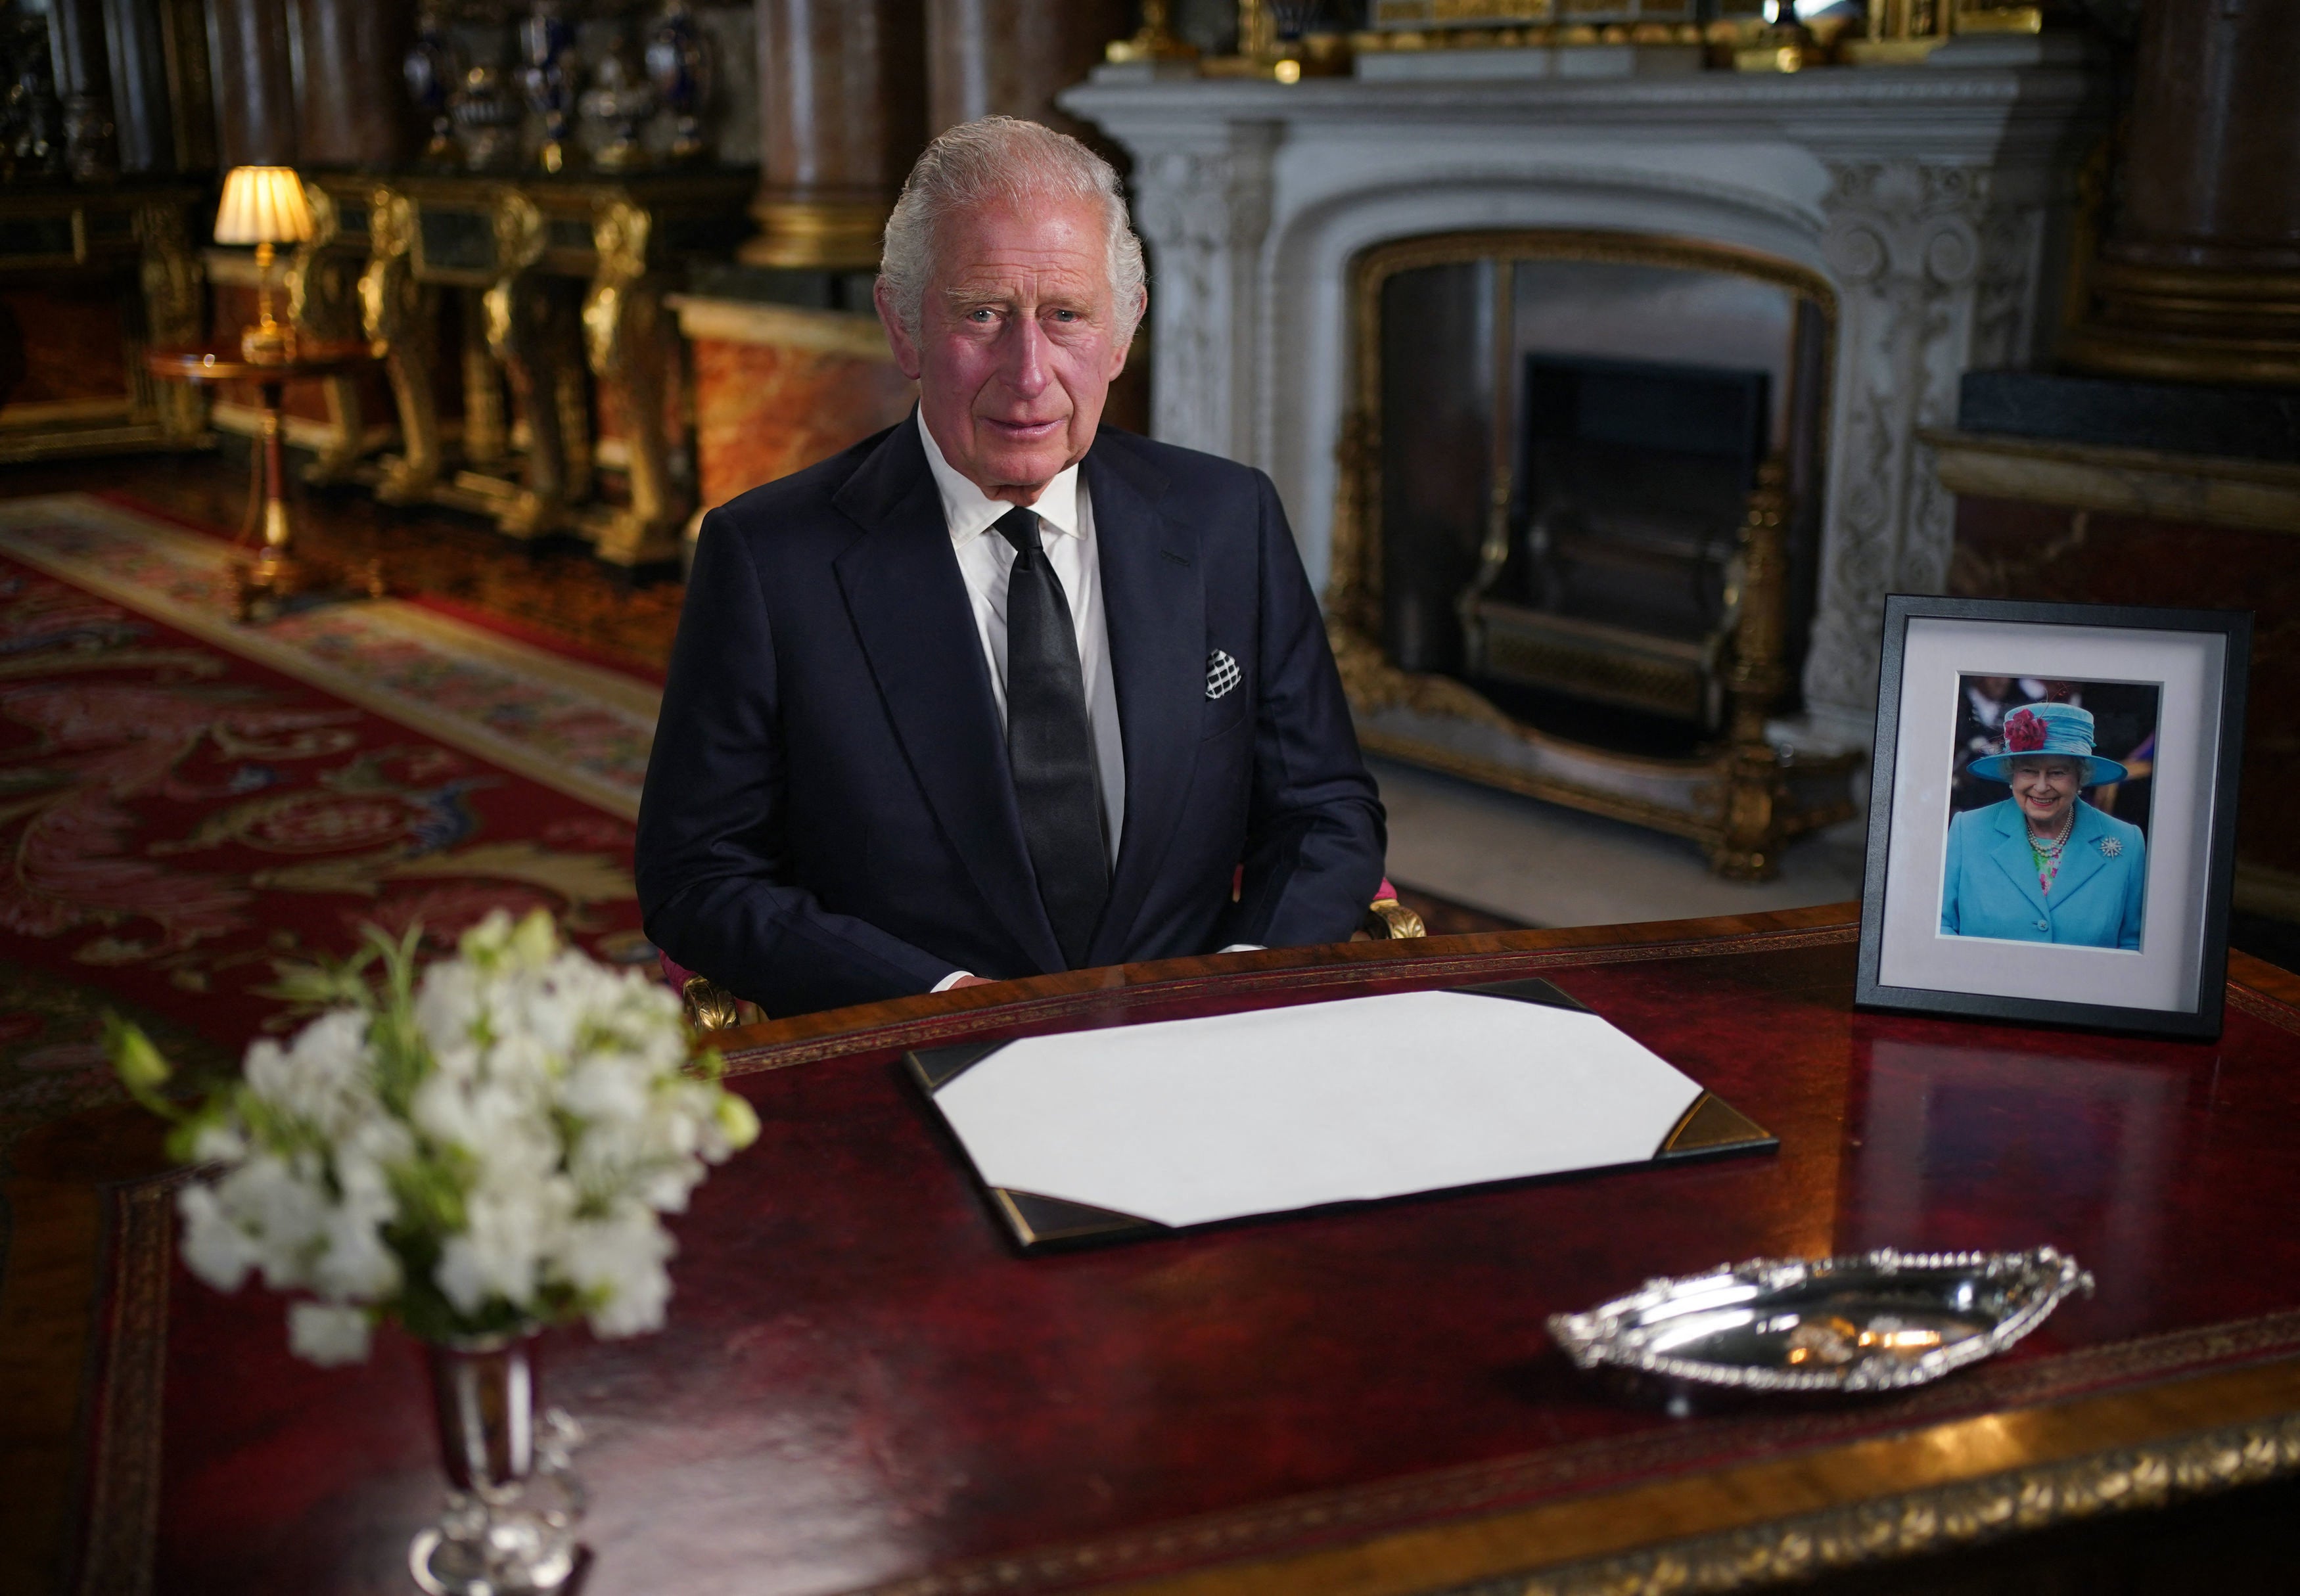 King Charles III makes a televised address to the Nation and the Commonwealth from the Blue Drawing Room at Buckingham Palace in London on September 9, 2022, a day after Queen Elizabeth II died at the age of 96